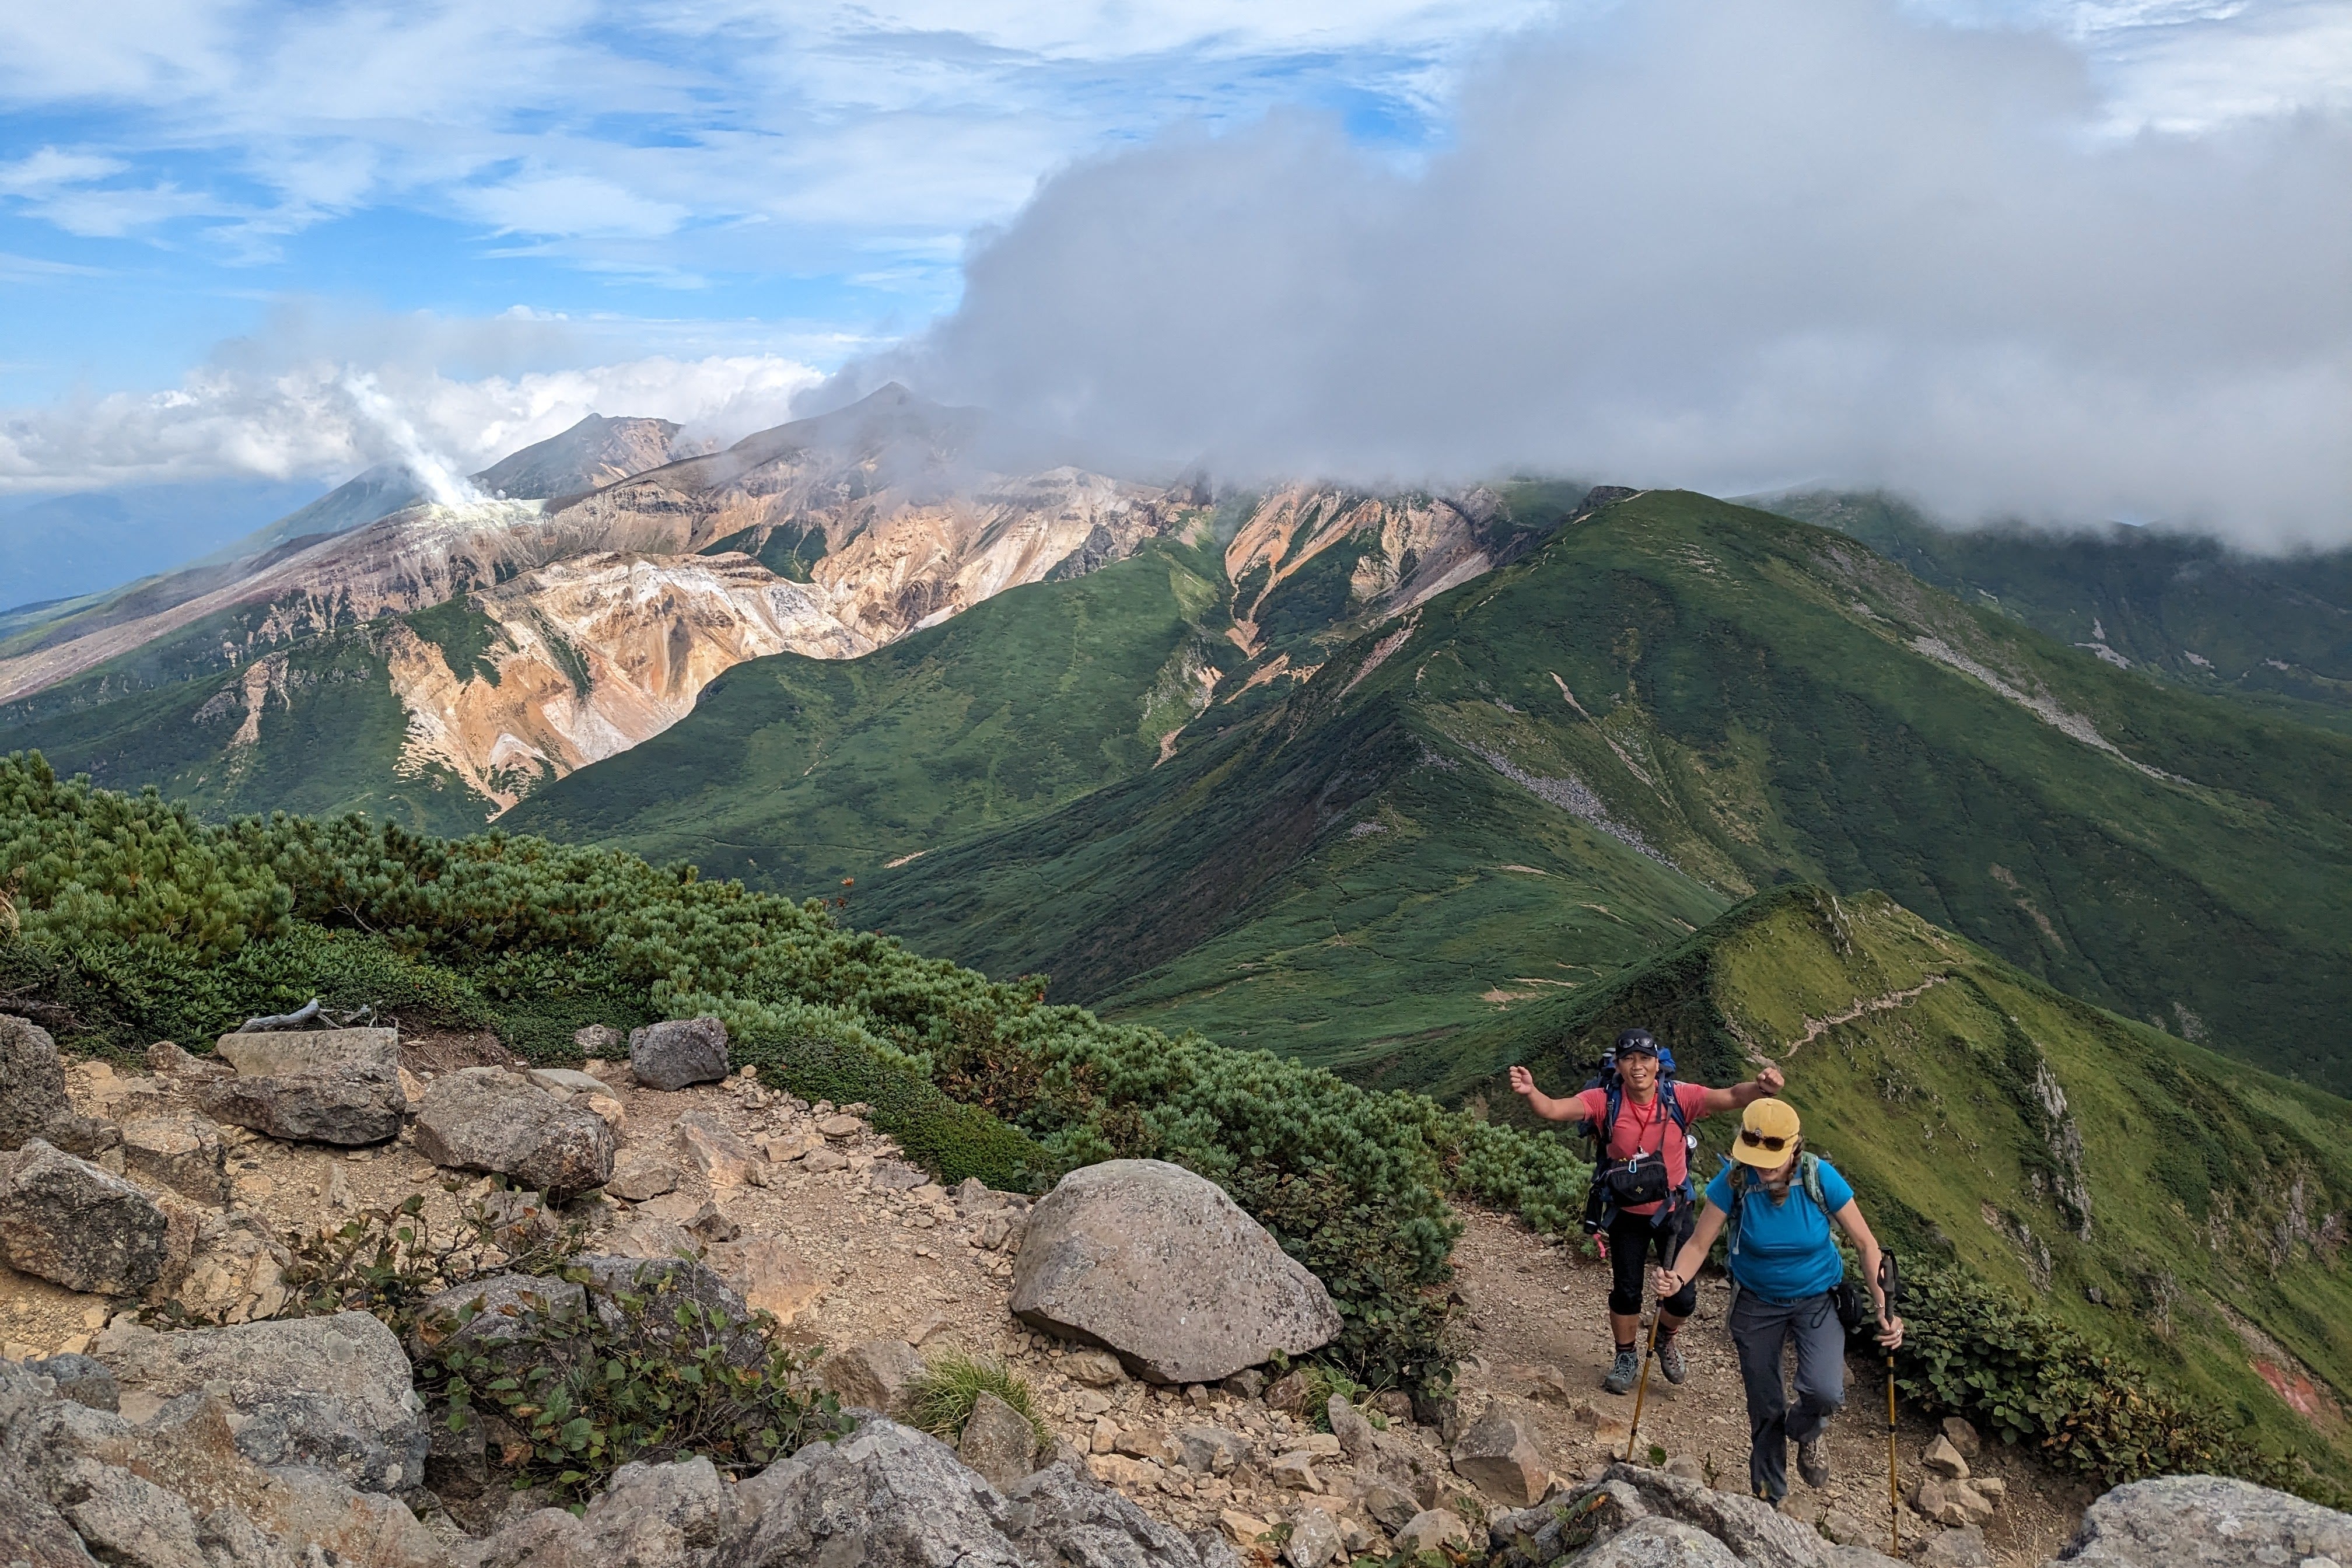 Two hikers make their way up a rocky hiking route on Mt. Furano, with green mountains in the background. One of them gives the camera a thumbs-up.